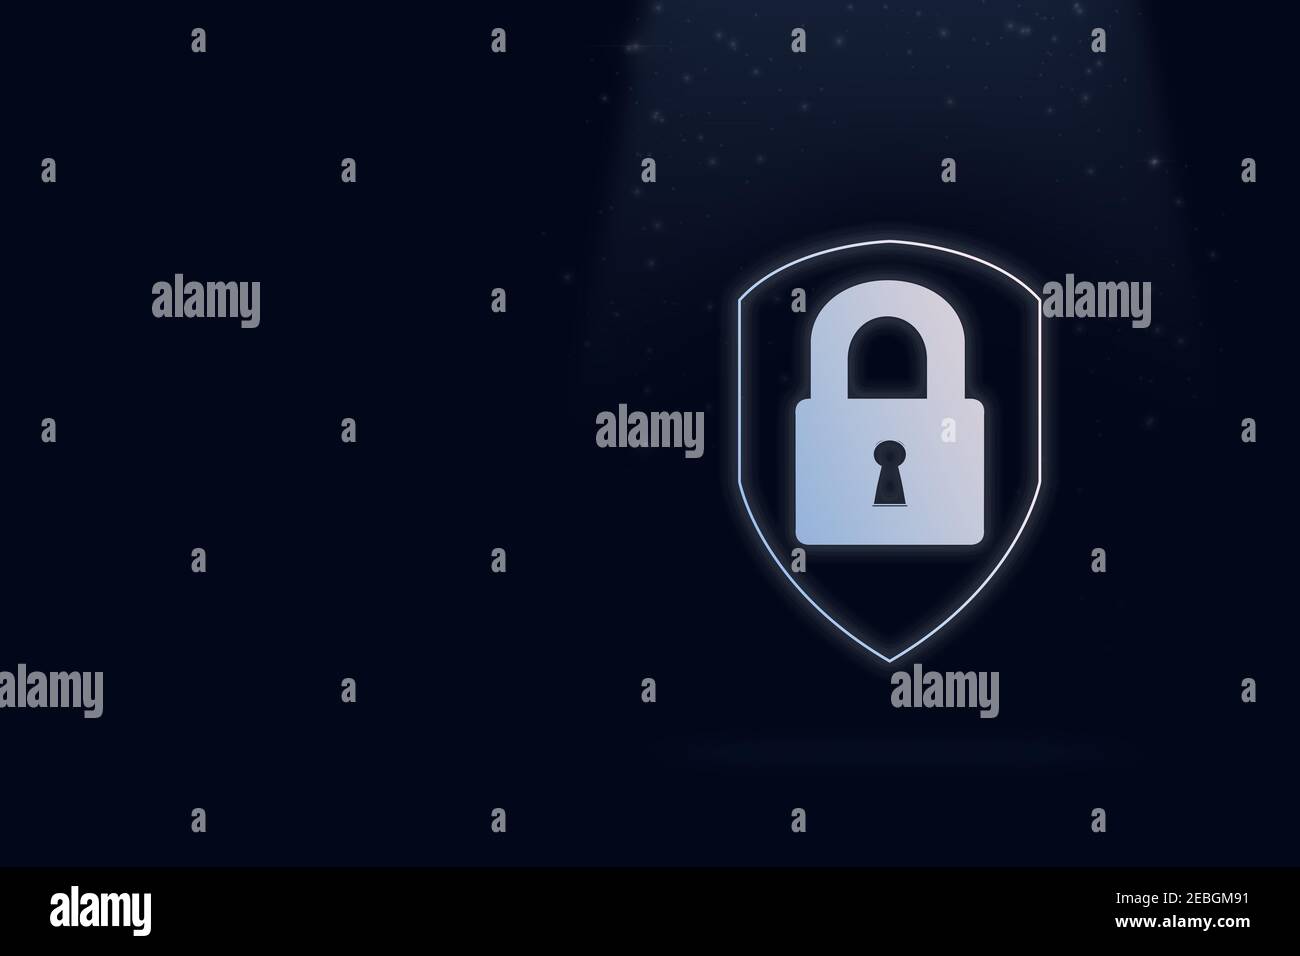 Virtual padlock hologram on dark blue background. Concept of network security Cyber security network. Padlock icon and internet technology networking. Stock Photo